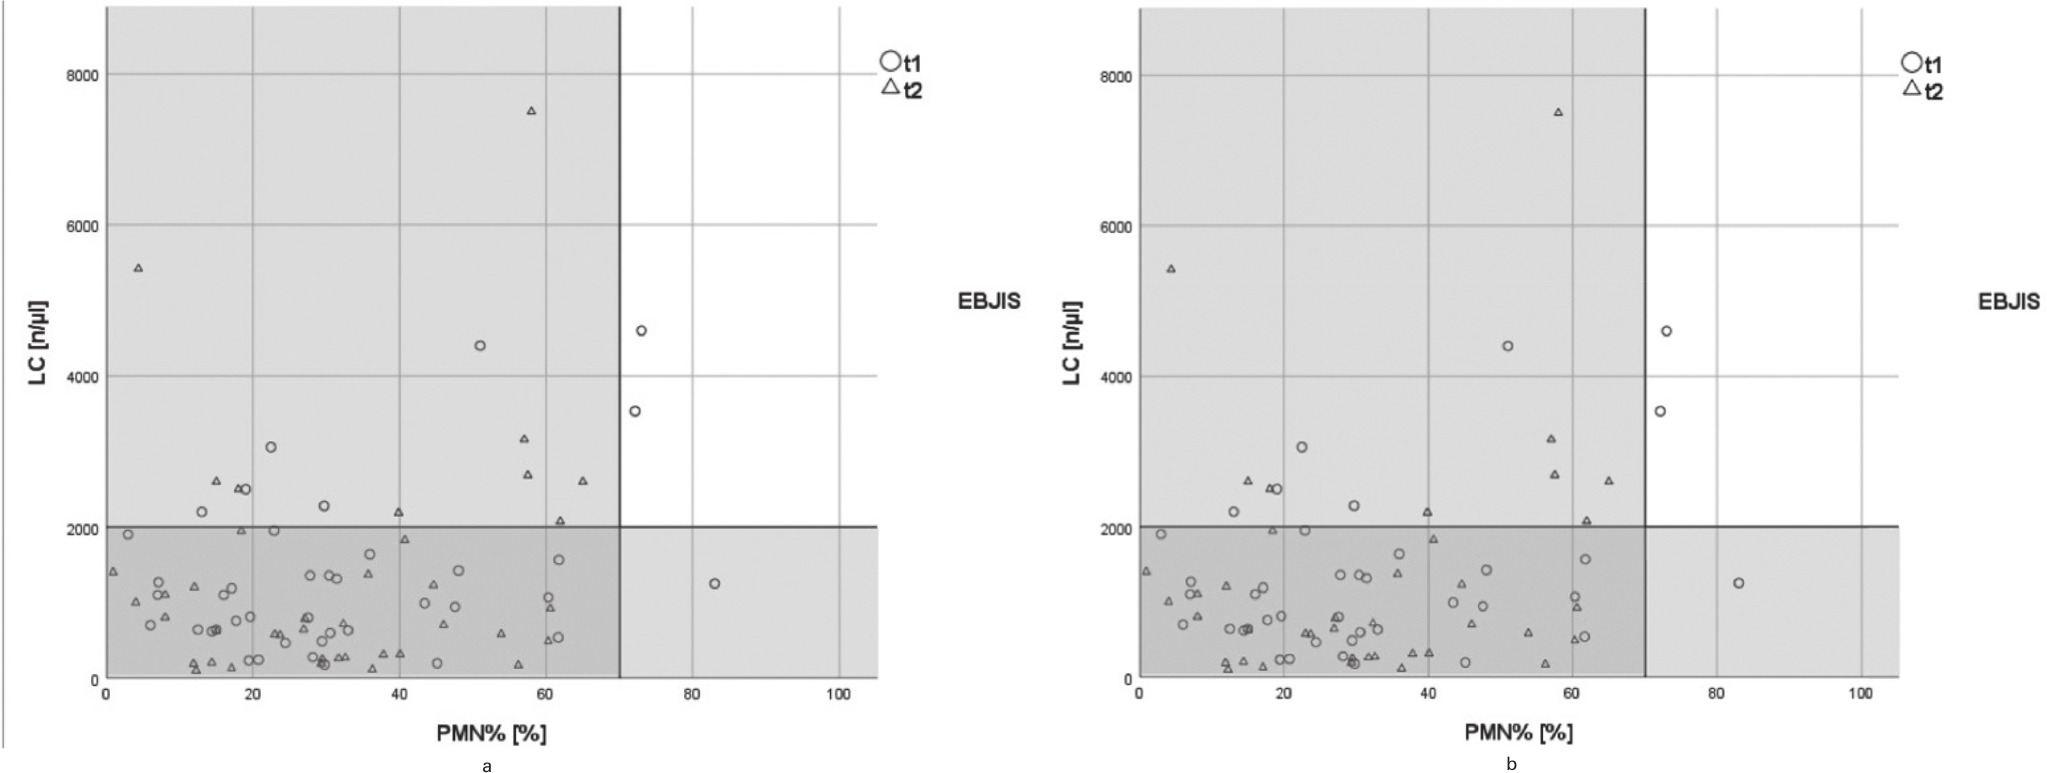 Fig. 3 
          Different leucocyte cell counts and polymorphonuclear percentage of all patients with displayed European Bone and Joint Infection Society (EBJIS) criteria. a) Leucocyte cell count (LC) (n/μL) and PMN% at the respective time points of the first (t1) and second (t2) joint aspiration. Dislayed lines illustrate the cut-off levels suggestive for PJI according to the European Bone and Joint Infection Society (EBJIS) criteria. b) Different leucocyte cell counts and polymorphonuclear percentage of all patients with displayed MSIS criteria. LC (n/μL) and polymorphonuclear percentage (PMN%) at the respective time points of the first (t1) and second (t2) joint aspiration. Displayed lines illustrate the cut-off levels suggestive for PJI according to the Musculoskeletal Infection Society (MSIS) criteria.
        